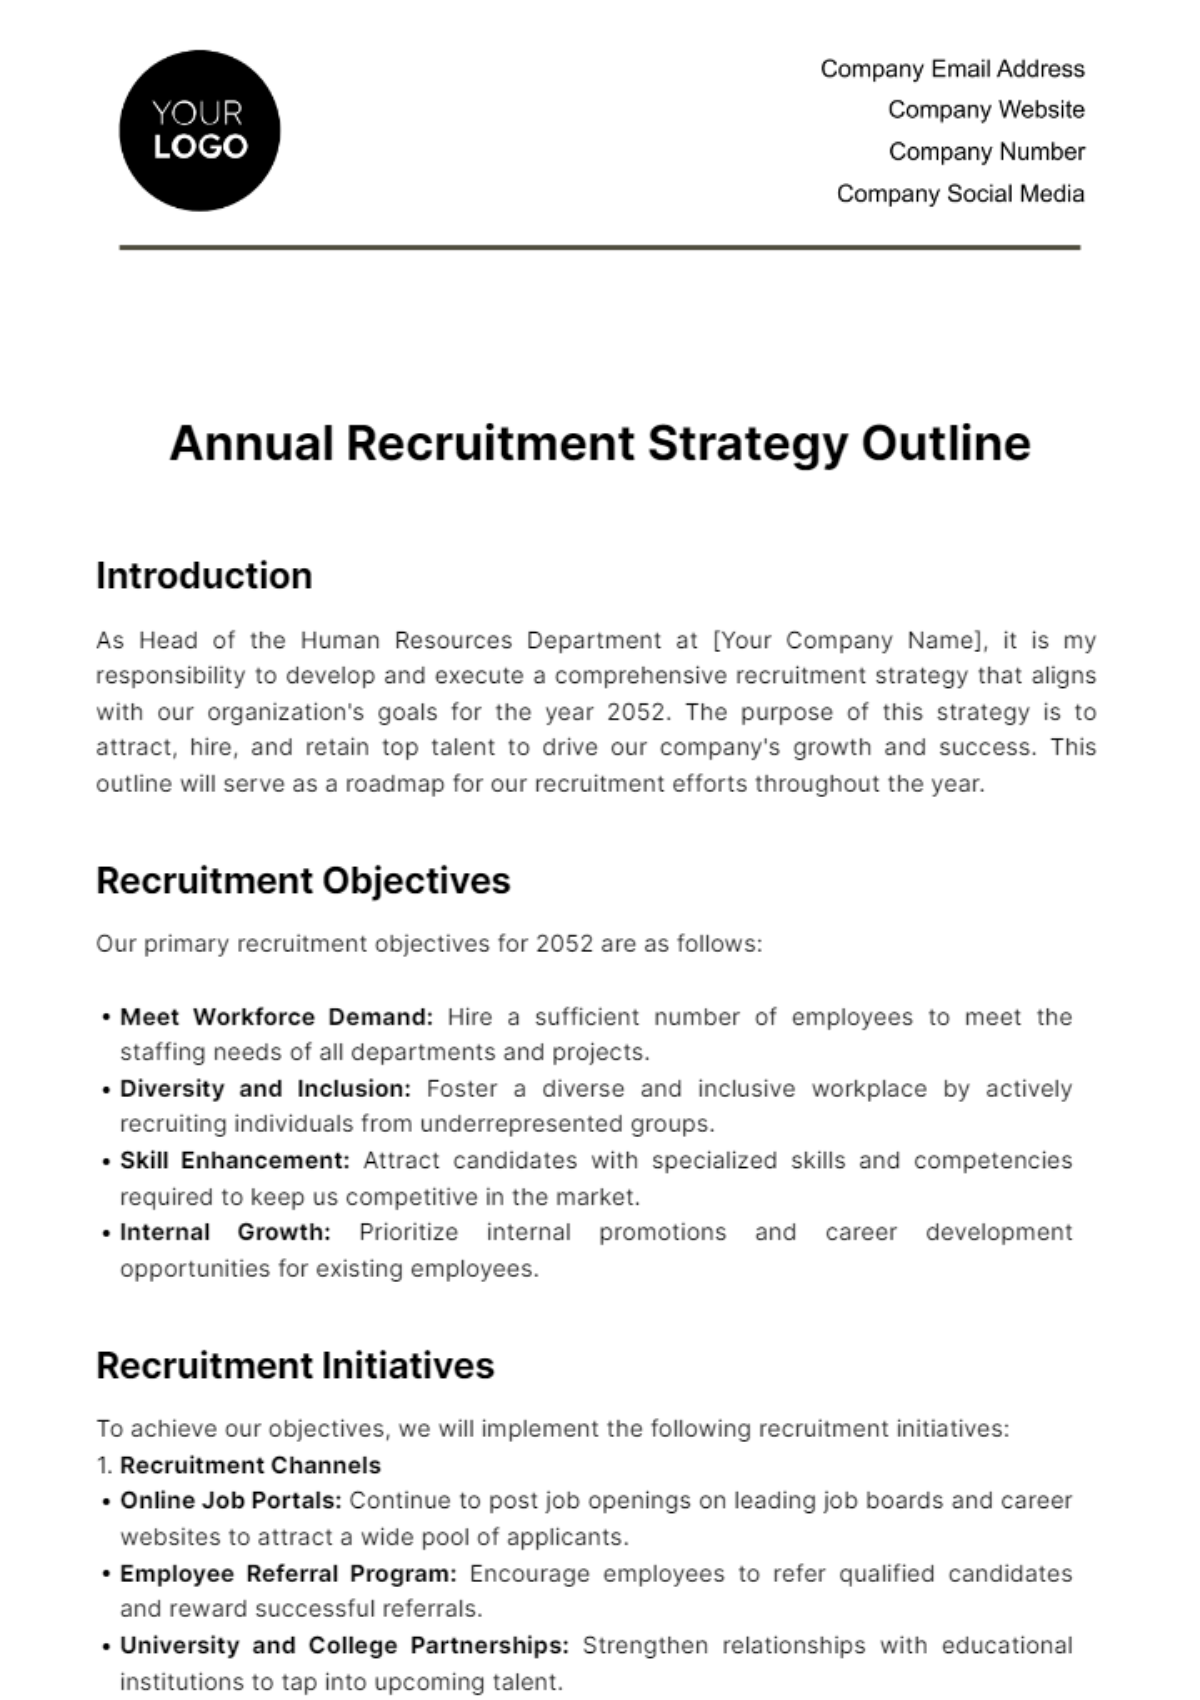 Free Annual Recruitment Strategy Outline HR Template